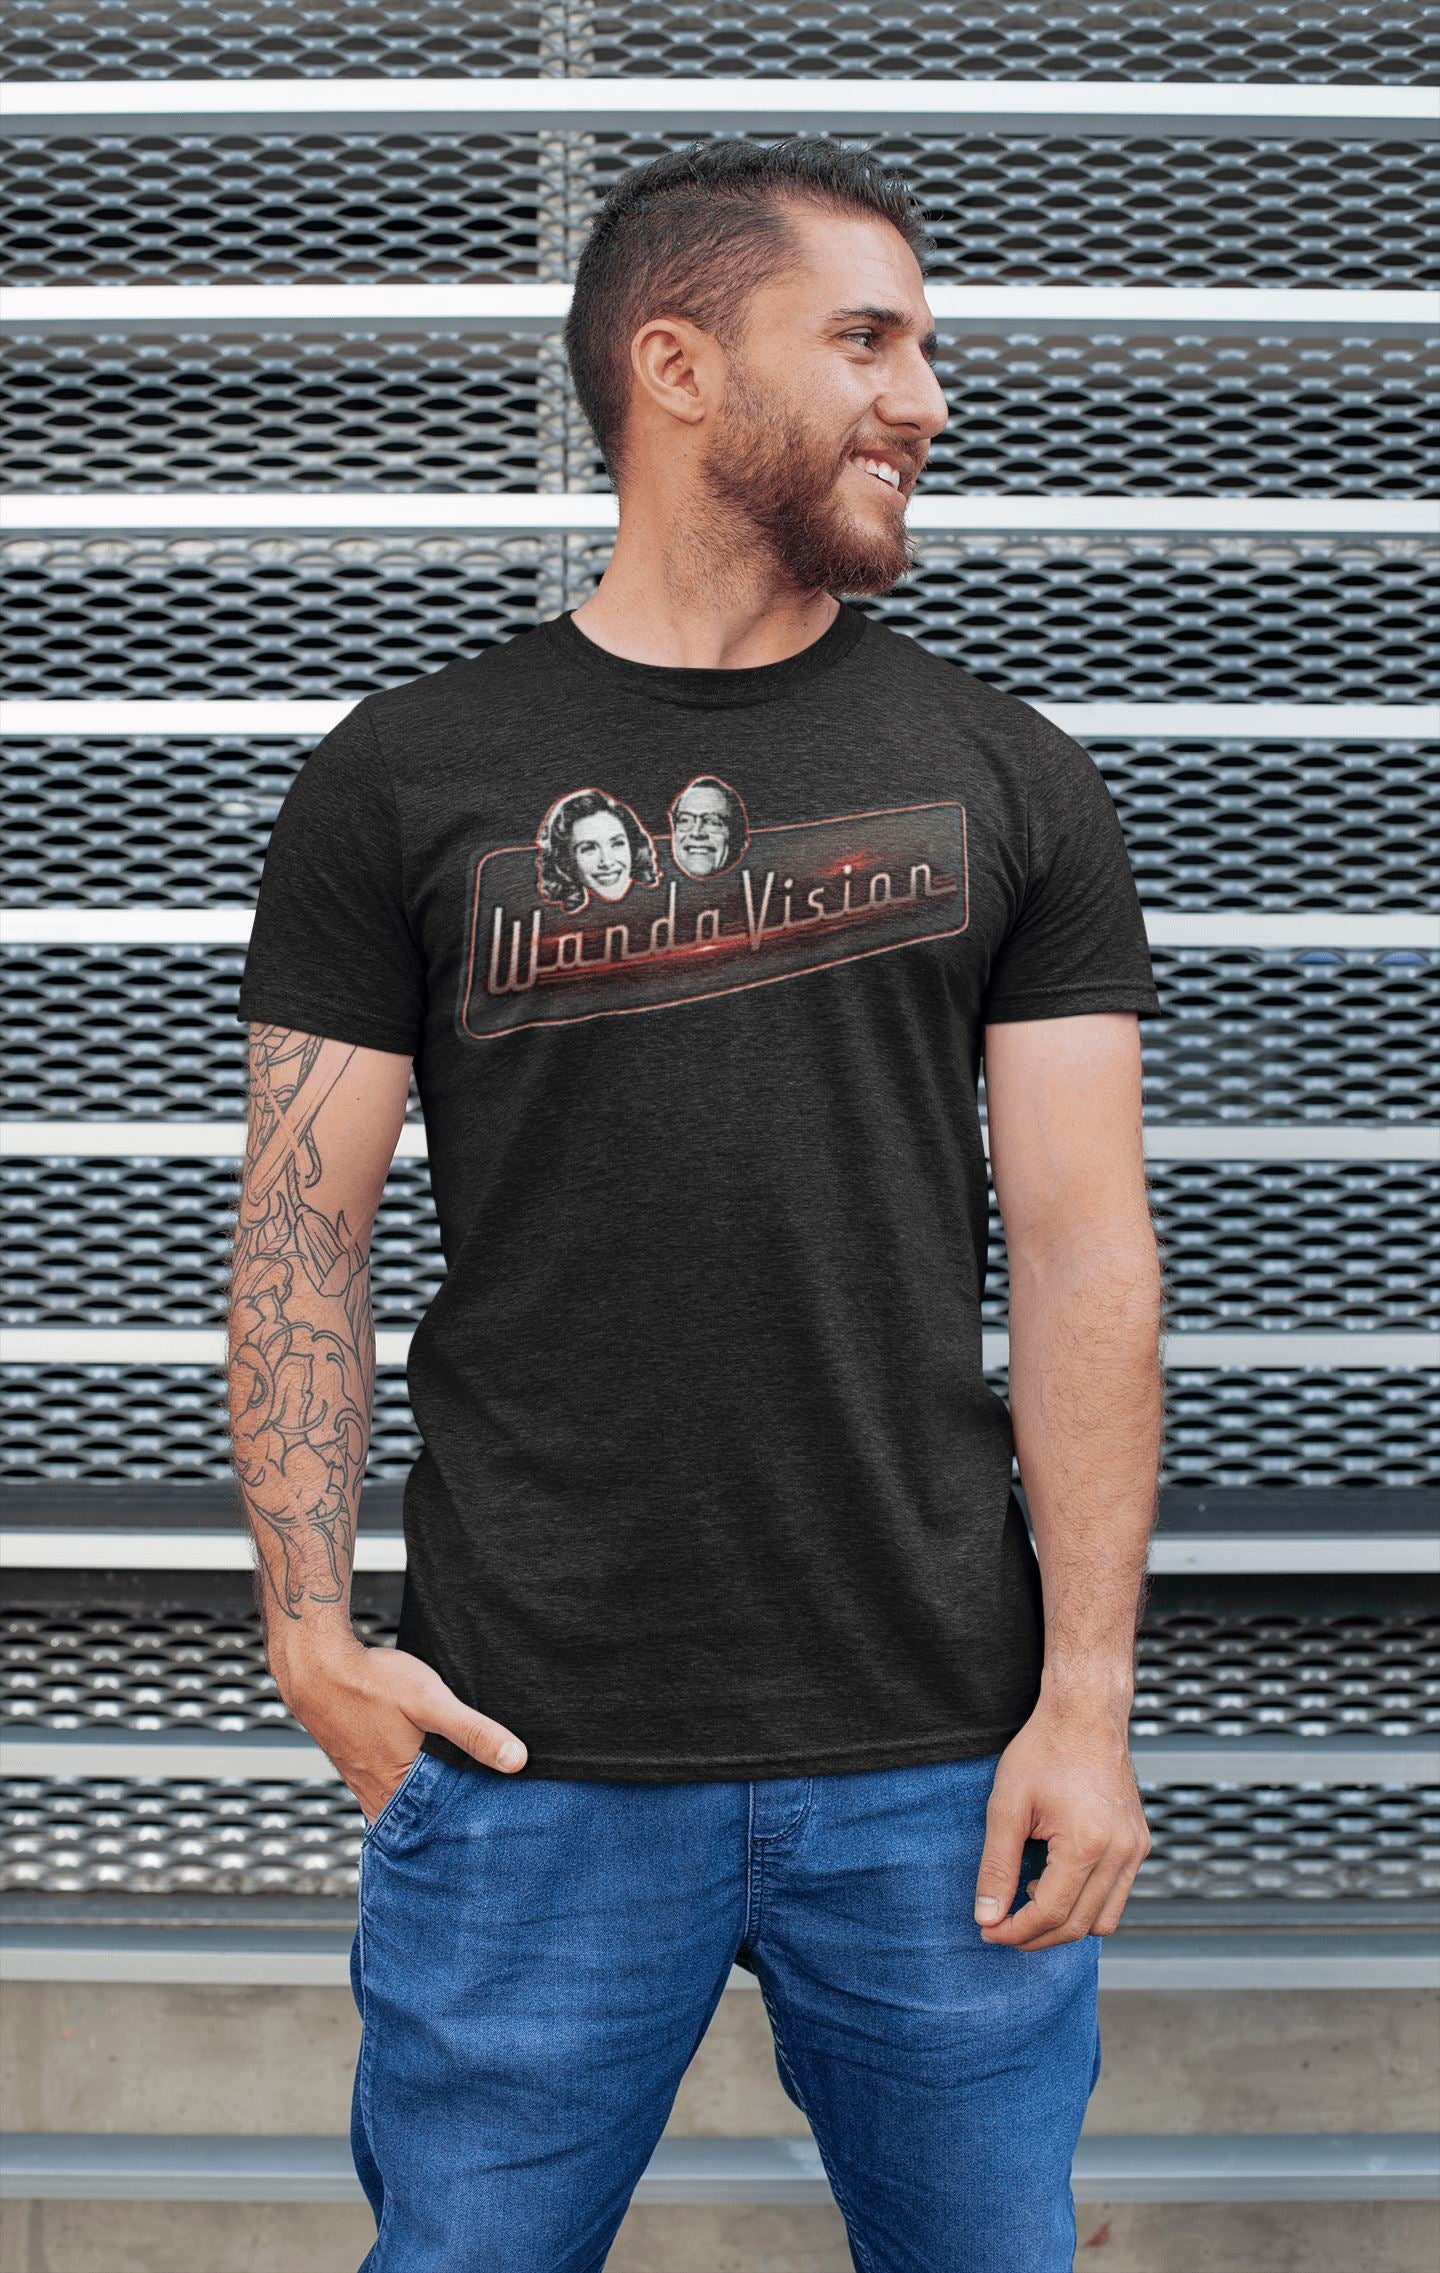 WandaVision Floating Heads Official T Shirt for Men and Women | Premium Design | Catch My Drift India - Catch My Drift India  black, clothing, made in india, marvel, movies, shirt, super, sup